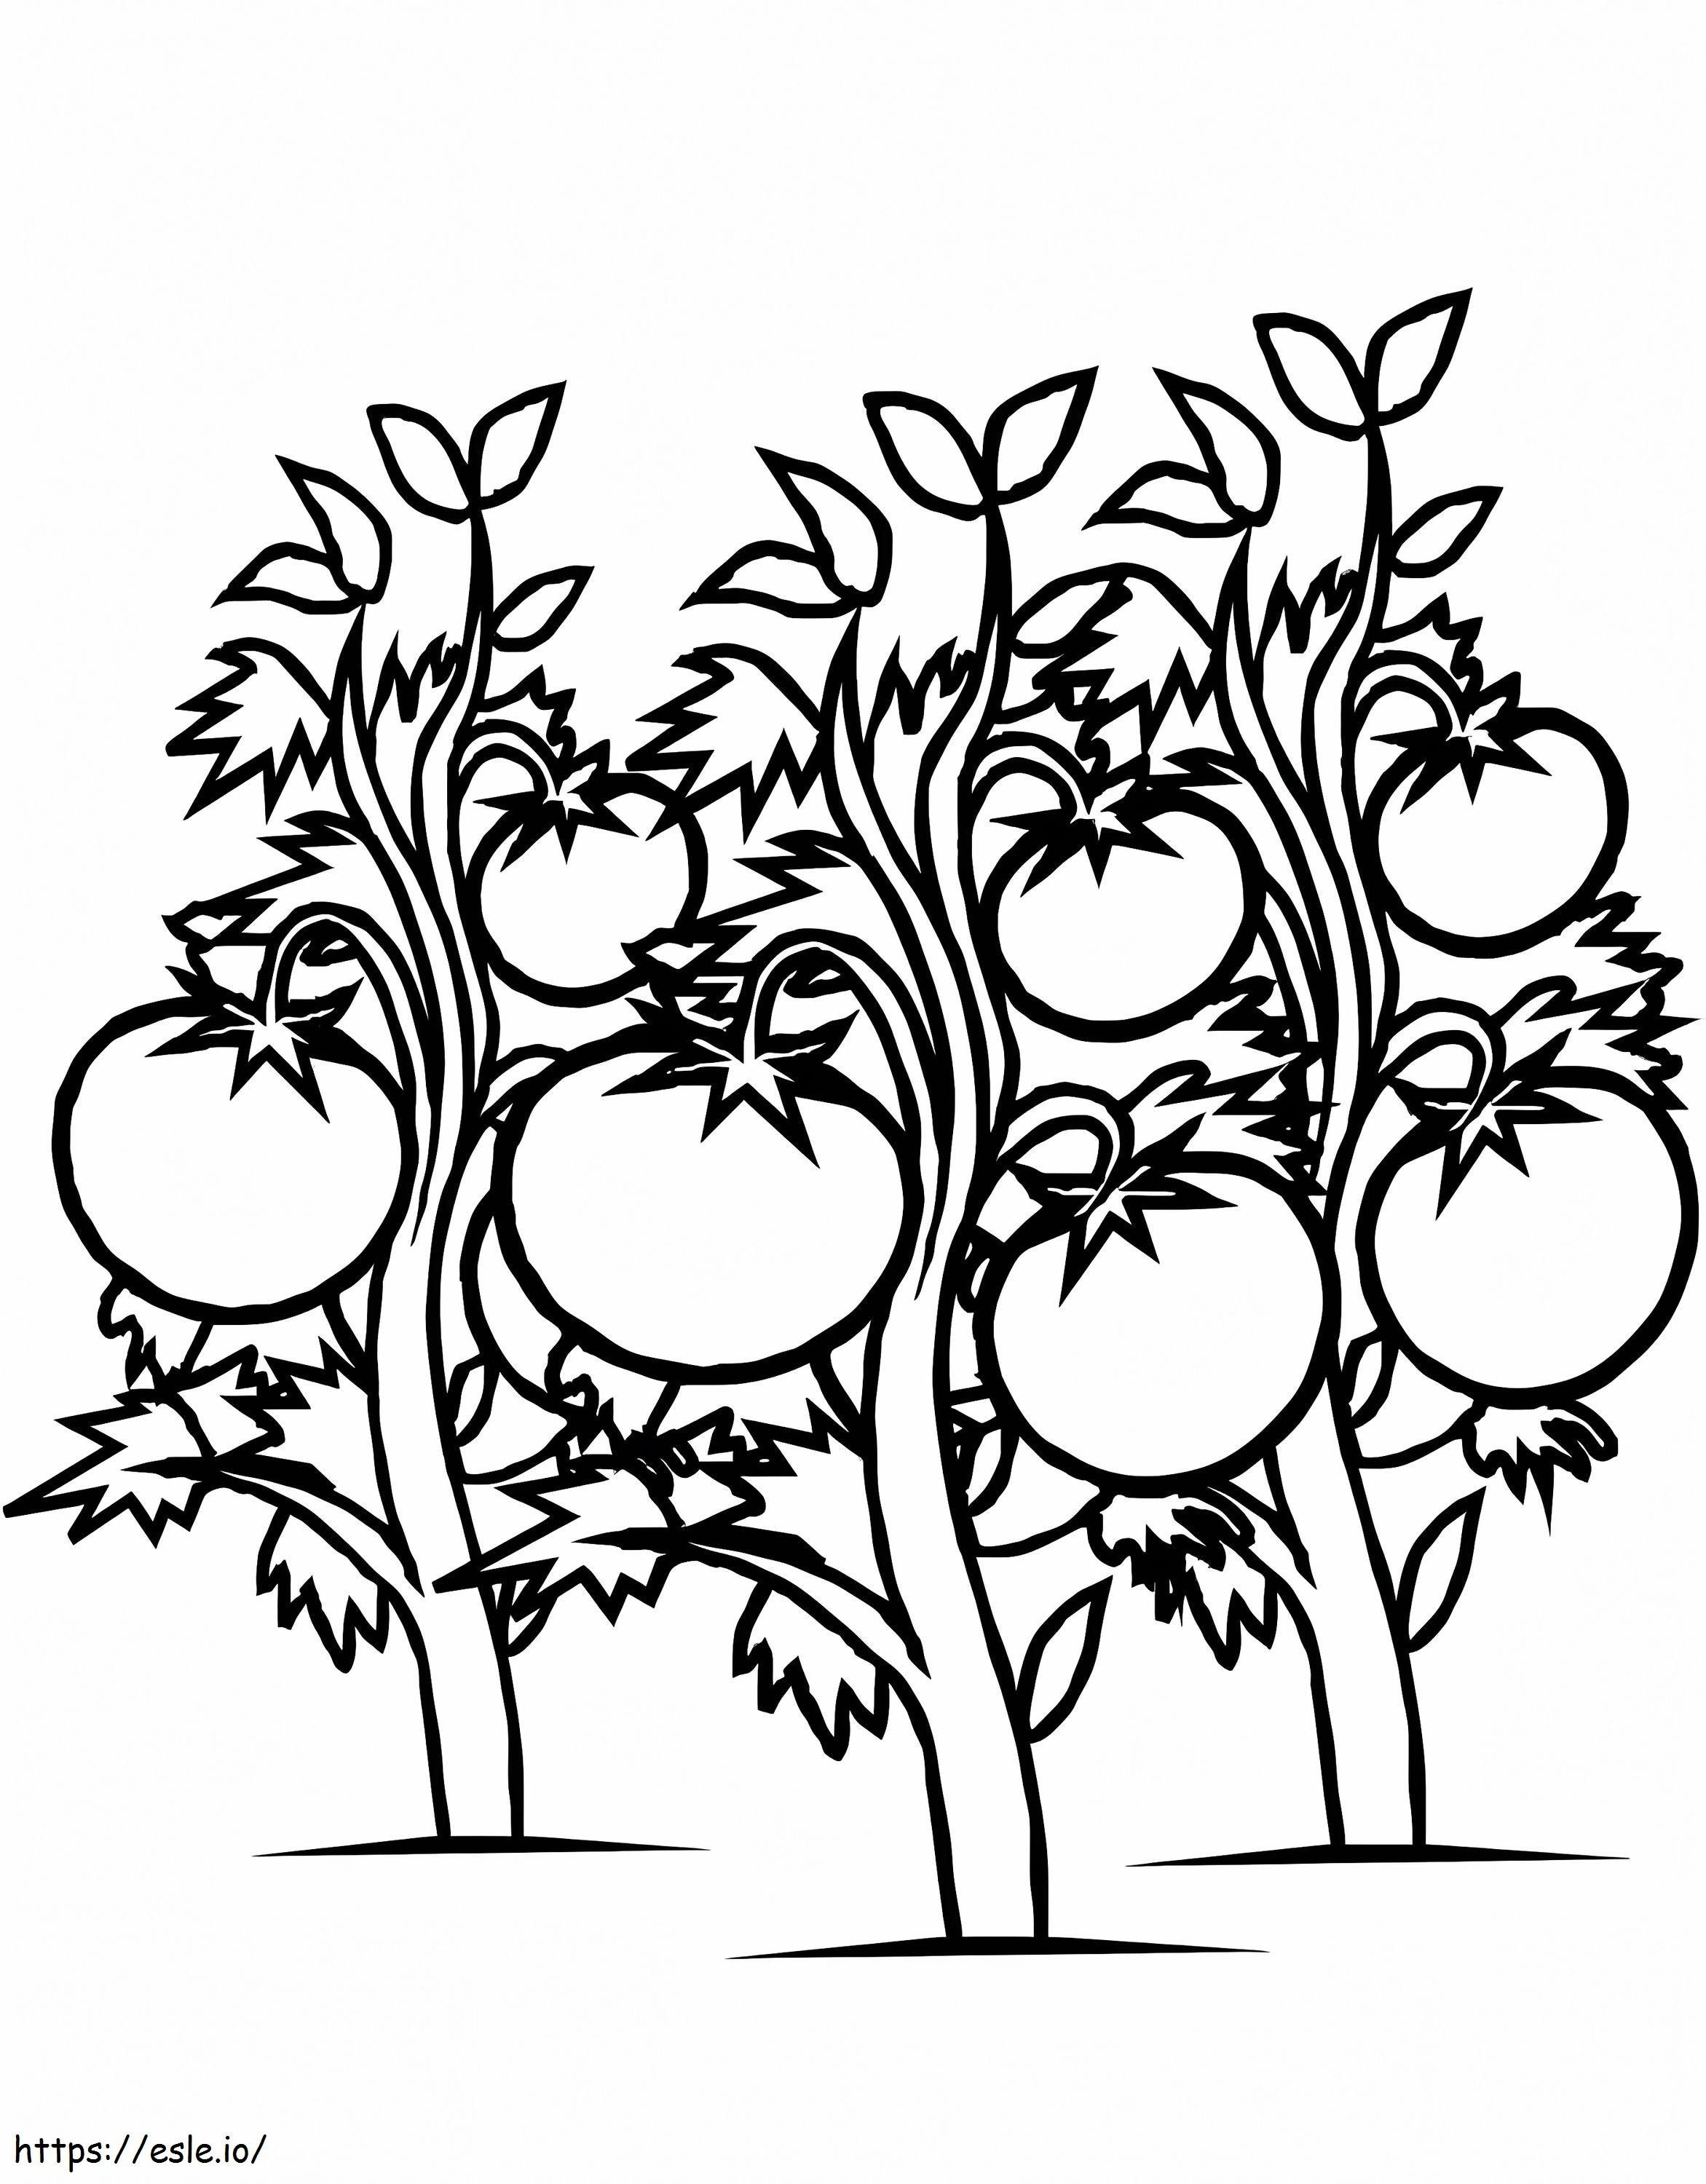 Tree Tomato coloring page